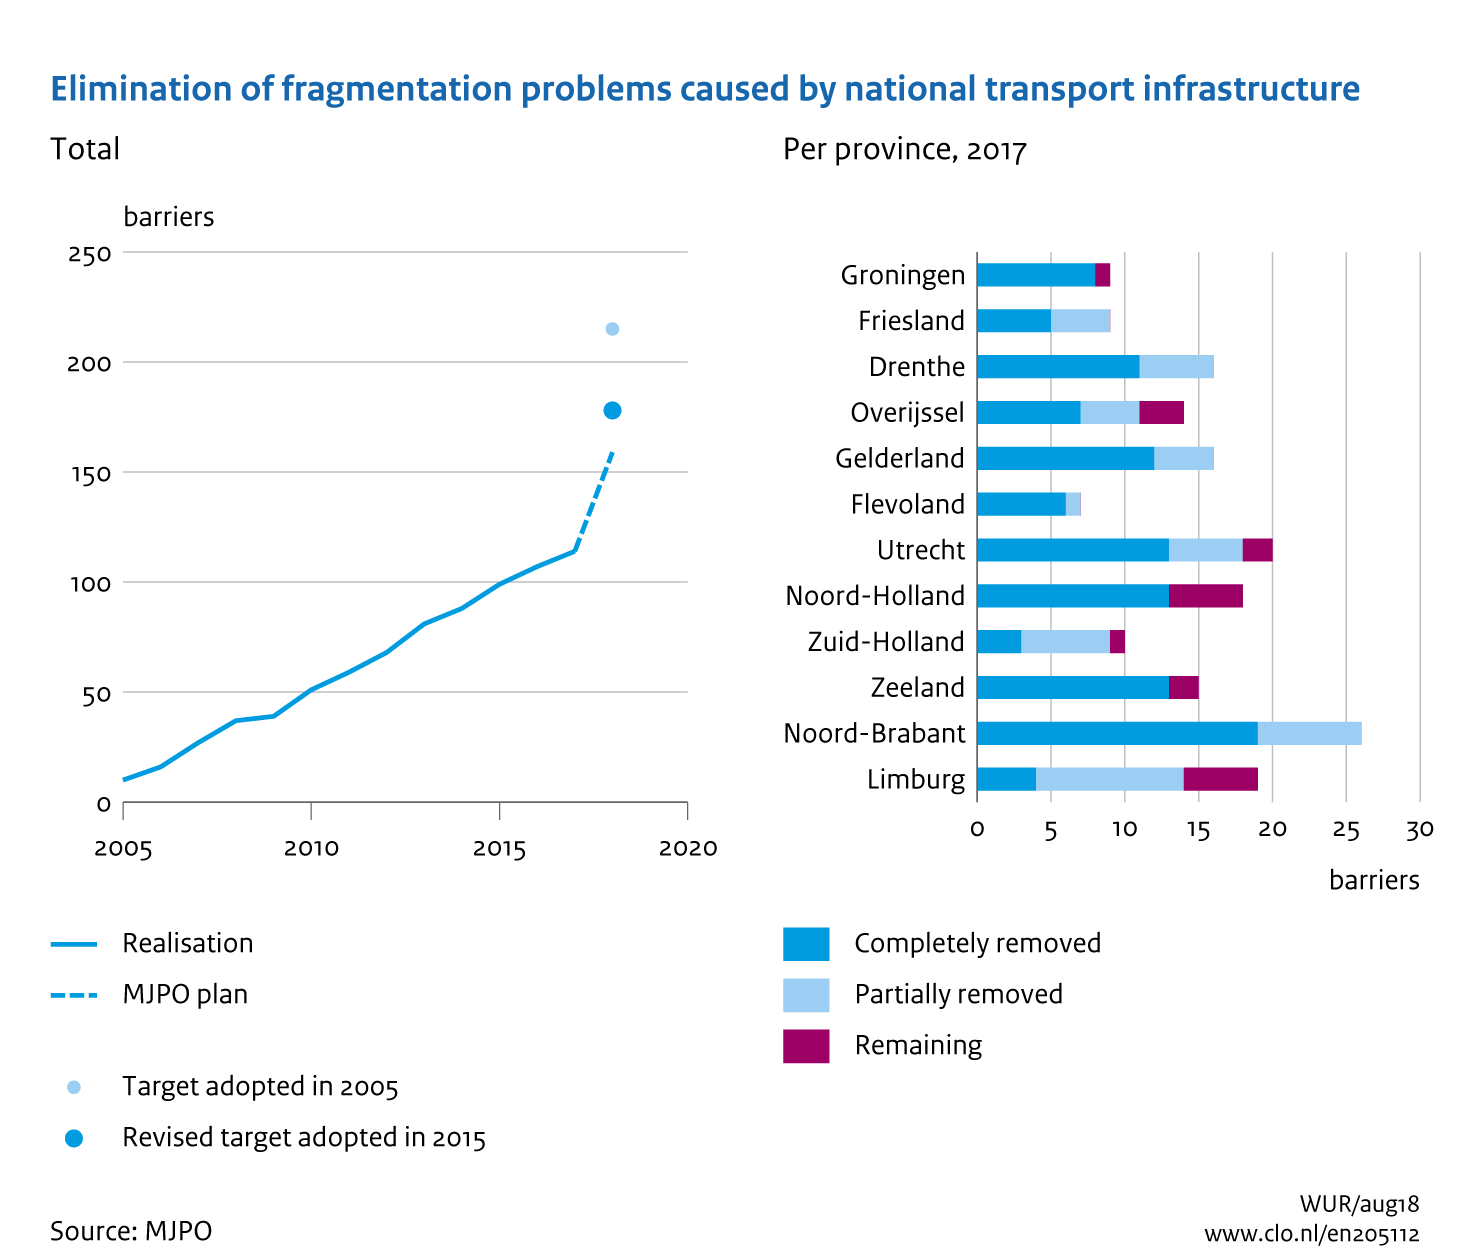 Image Elimination of fragmentation problems caused by national transport infrastructure. The image is further explained in the text.